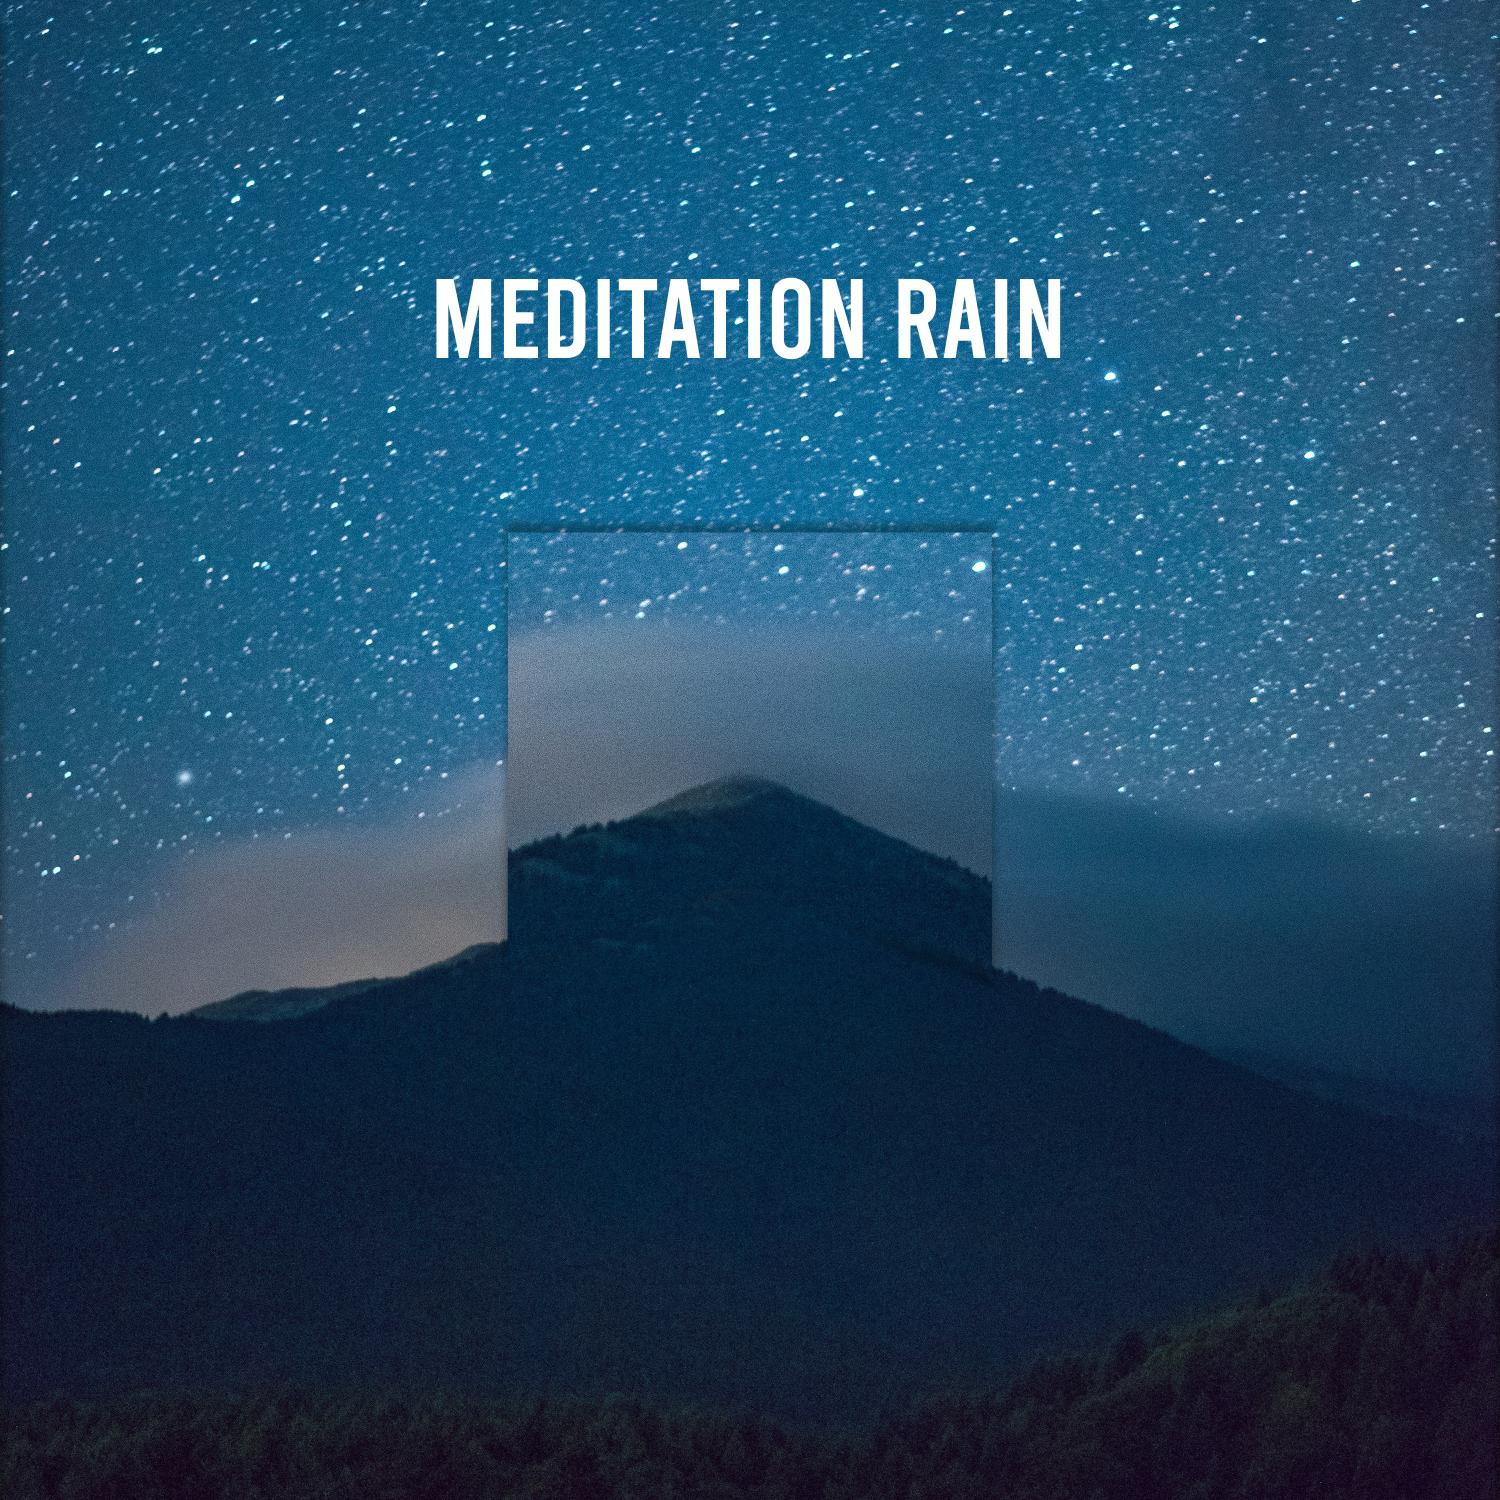 11 Lovely Rain Sounds to Help You Sleep and Relax